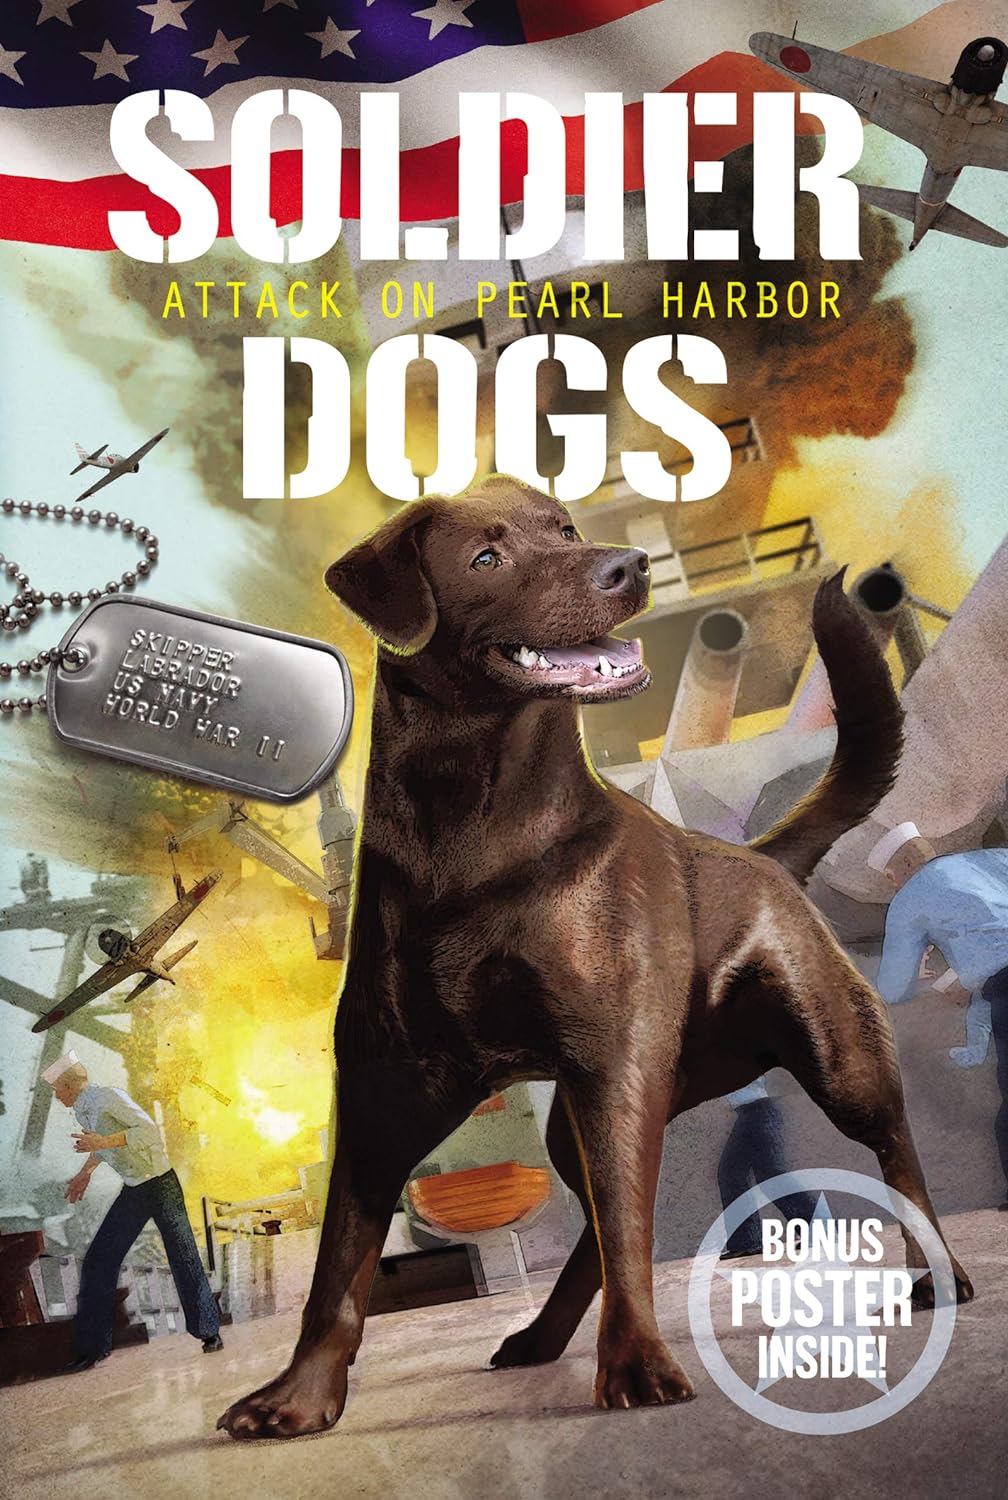 Soldier Dogs #2 Attack on Pearl Harbor